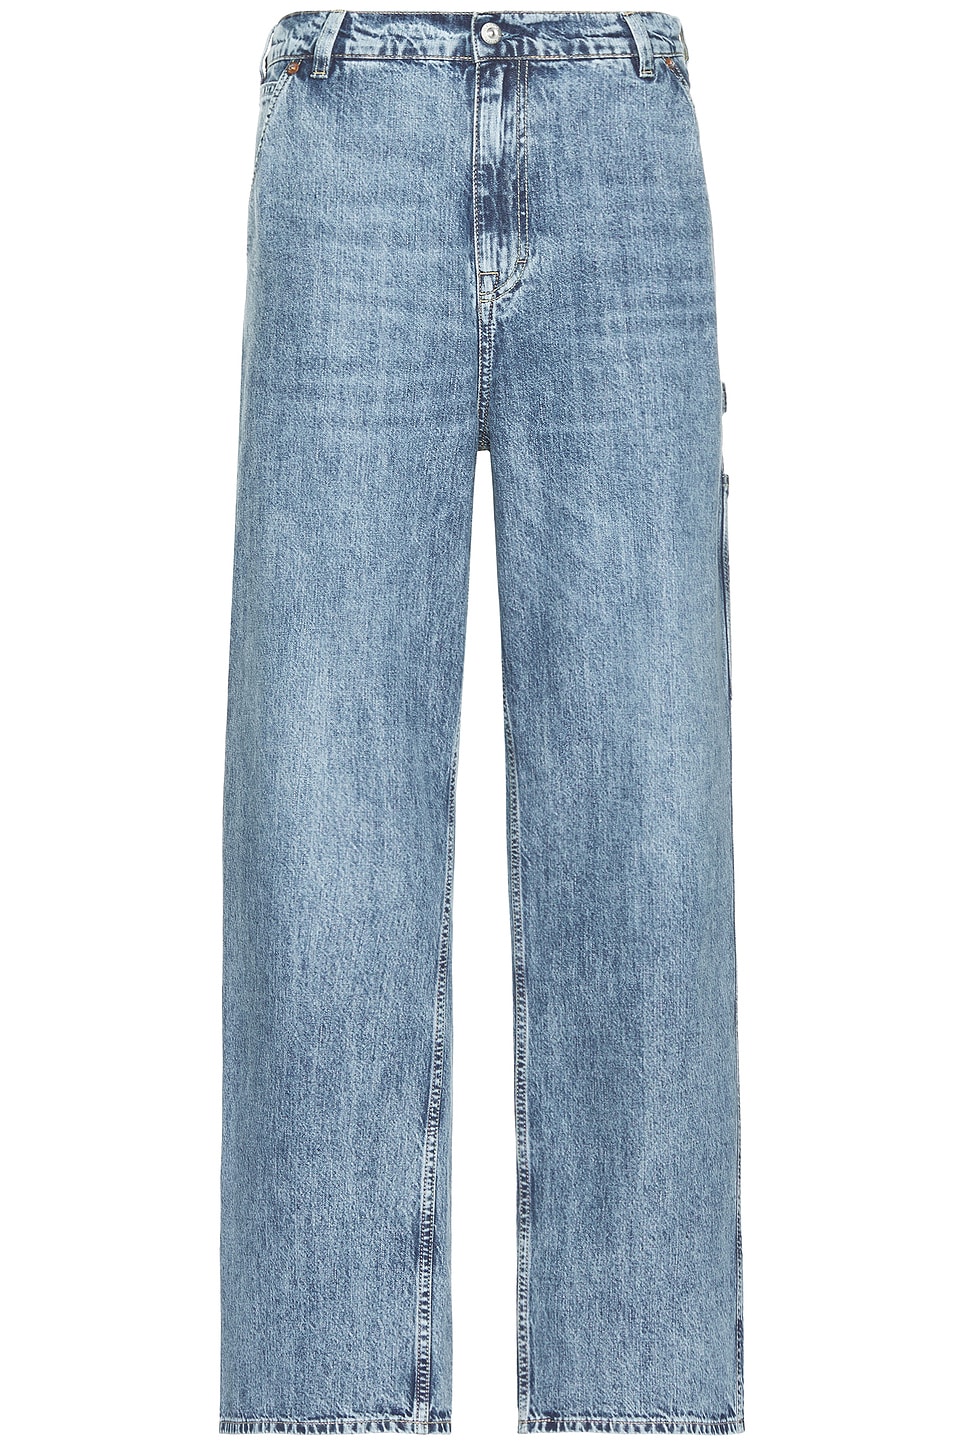 Image 1 of Our Legacy Joiner Trouser in Shadow Wash Denim